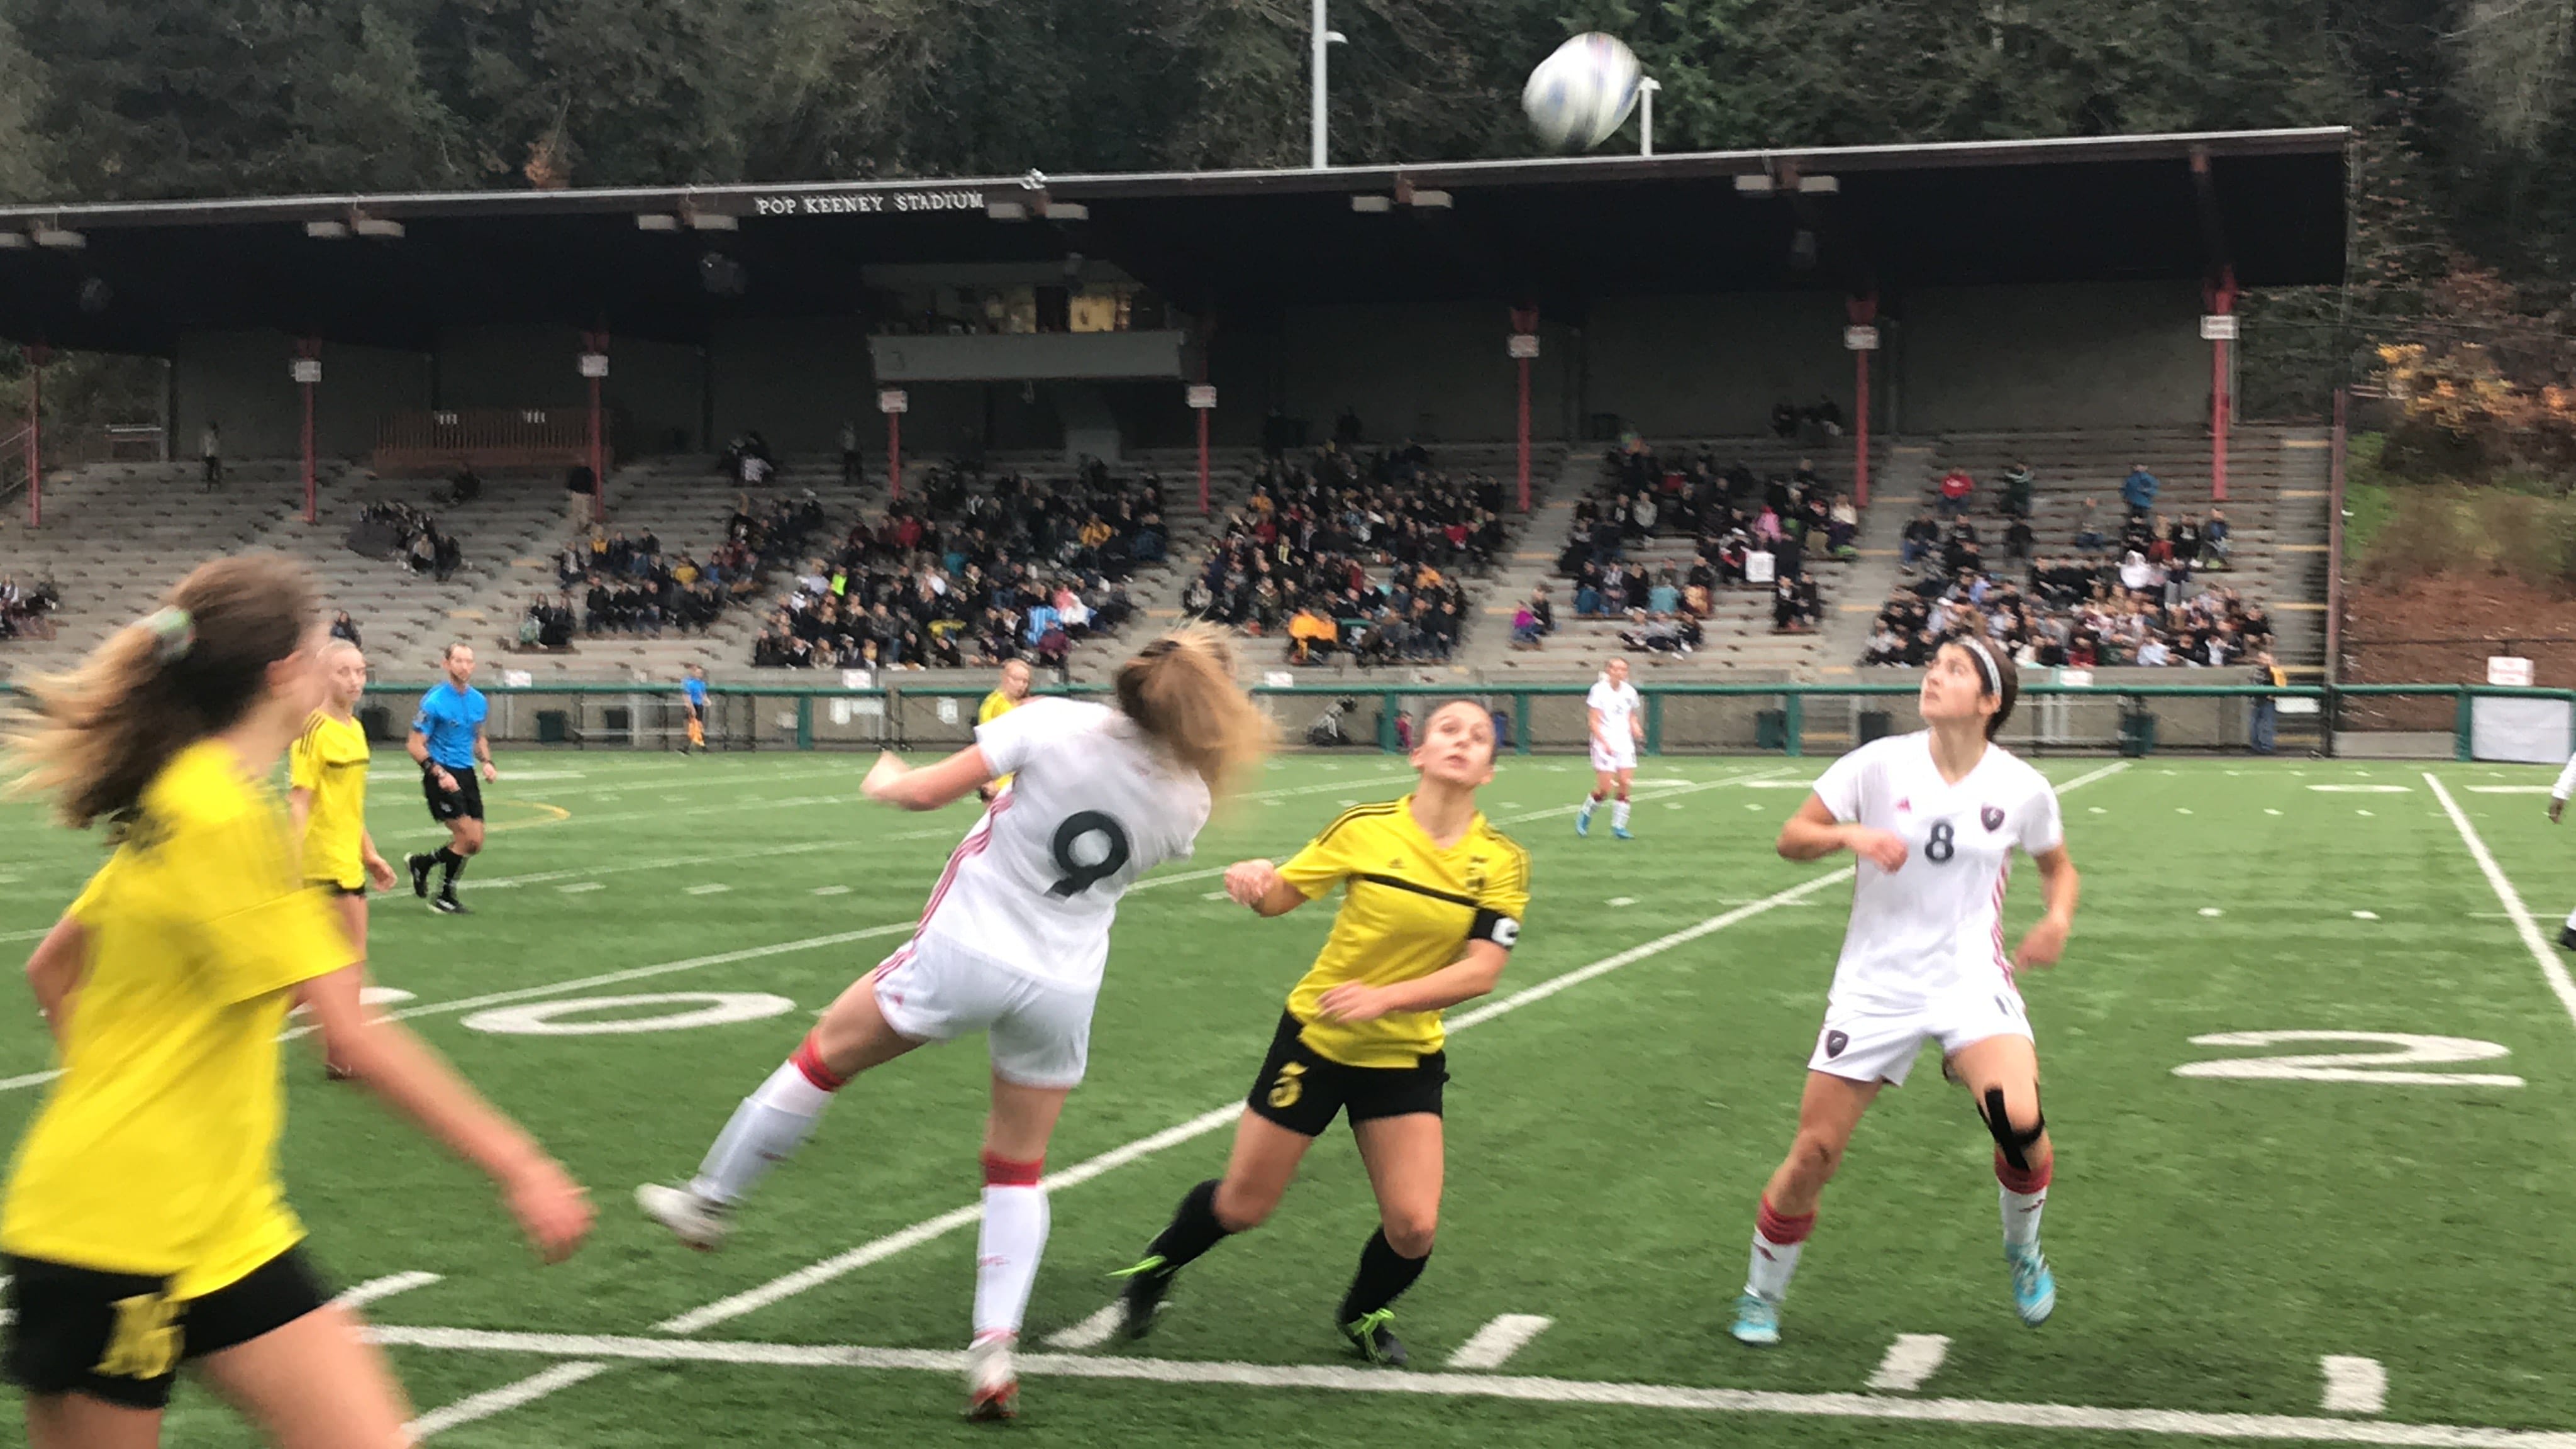 Sydney Young (9) follows through on a header in the second half of Union's 1-0 loss to Inglemoor in Saturday's 4A state quarterfinal soccer game in Bothell.